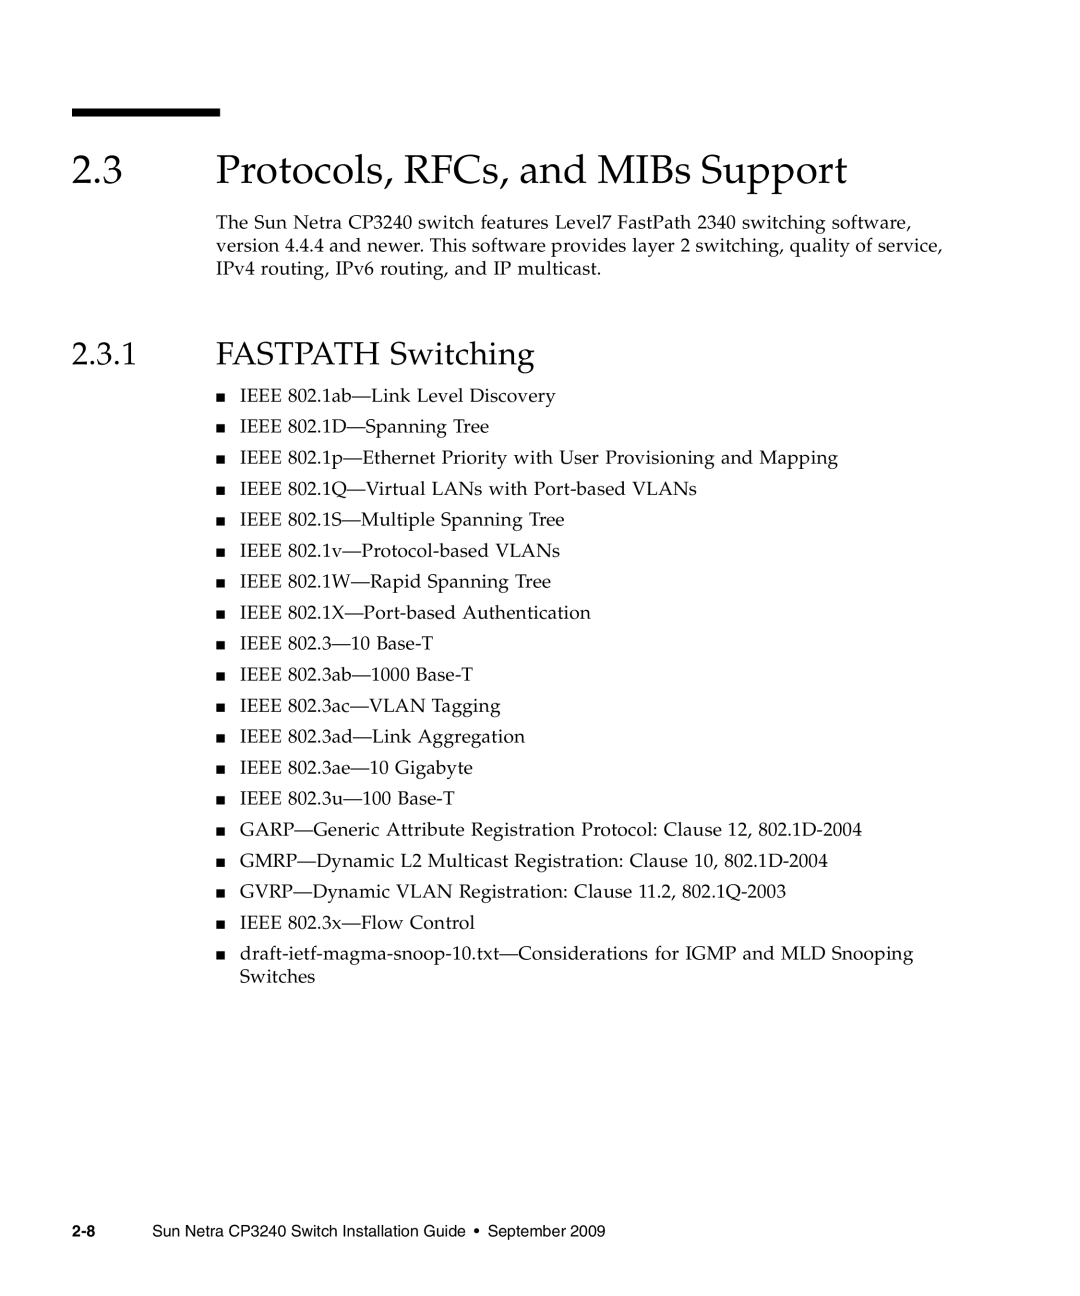 Sun Microsystems CP3240 manual Protocols, RFCs, and MIBs Support, FASTPATH Switching 